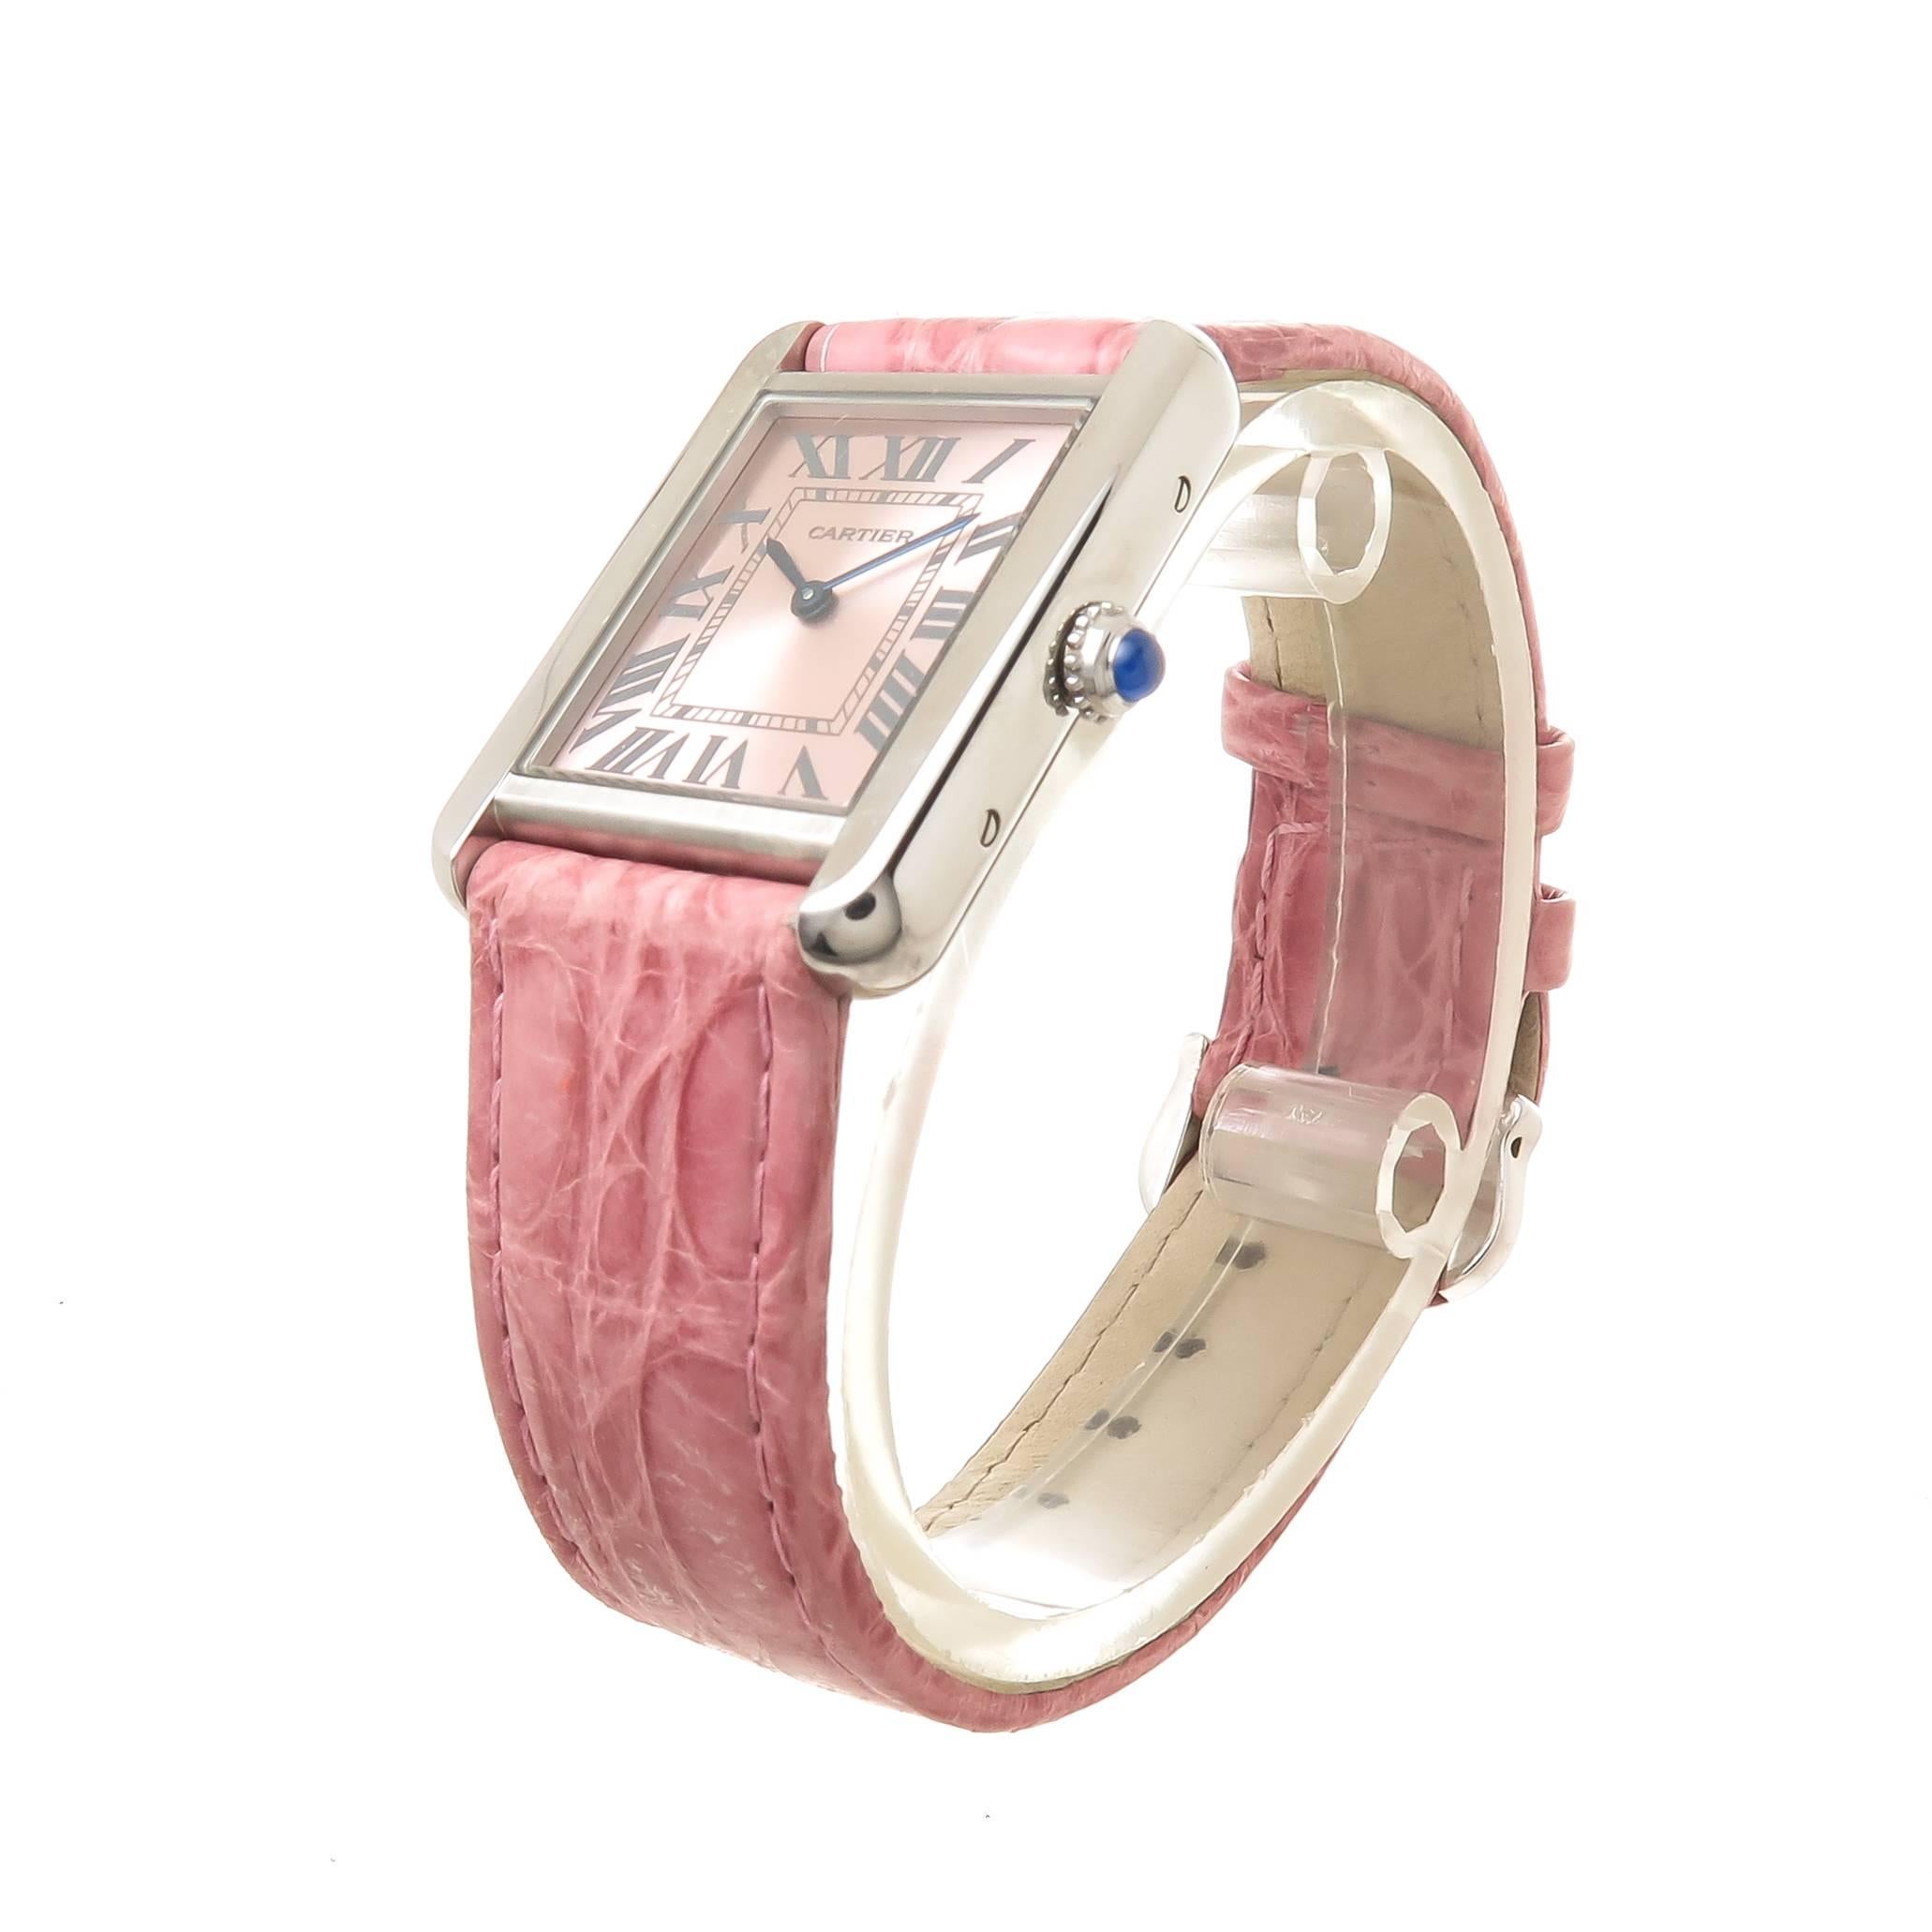 Circa 2010 Cartier Mid Size Tank Solo Wrist watch, 30 X 24 MM Stainless Steel Water Resistant Case, Quartz Movement,  Pink-Rose Dial with Silver - Gray markers and a Sapphire Crown. New Pink Padded Crocodile Strap with Cartier Tang Buckle. Recently